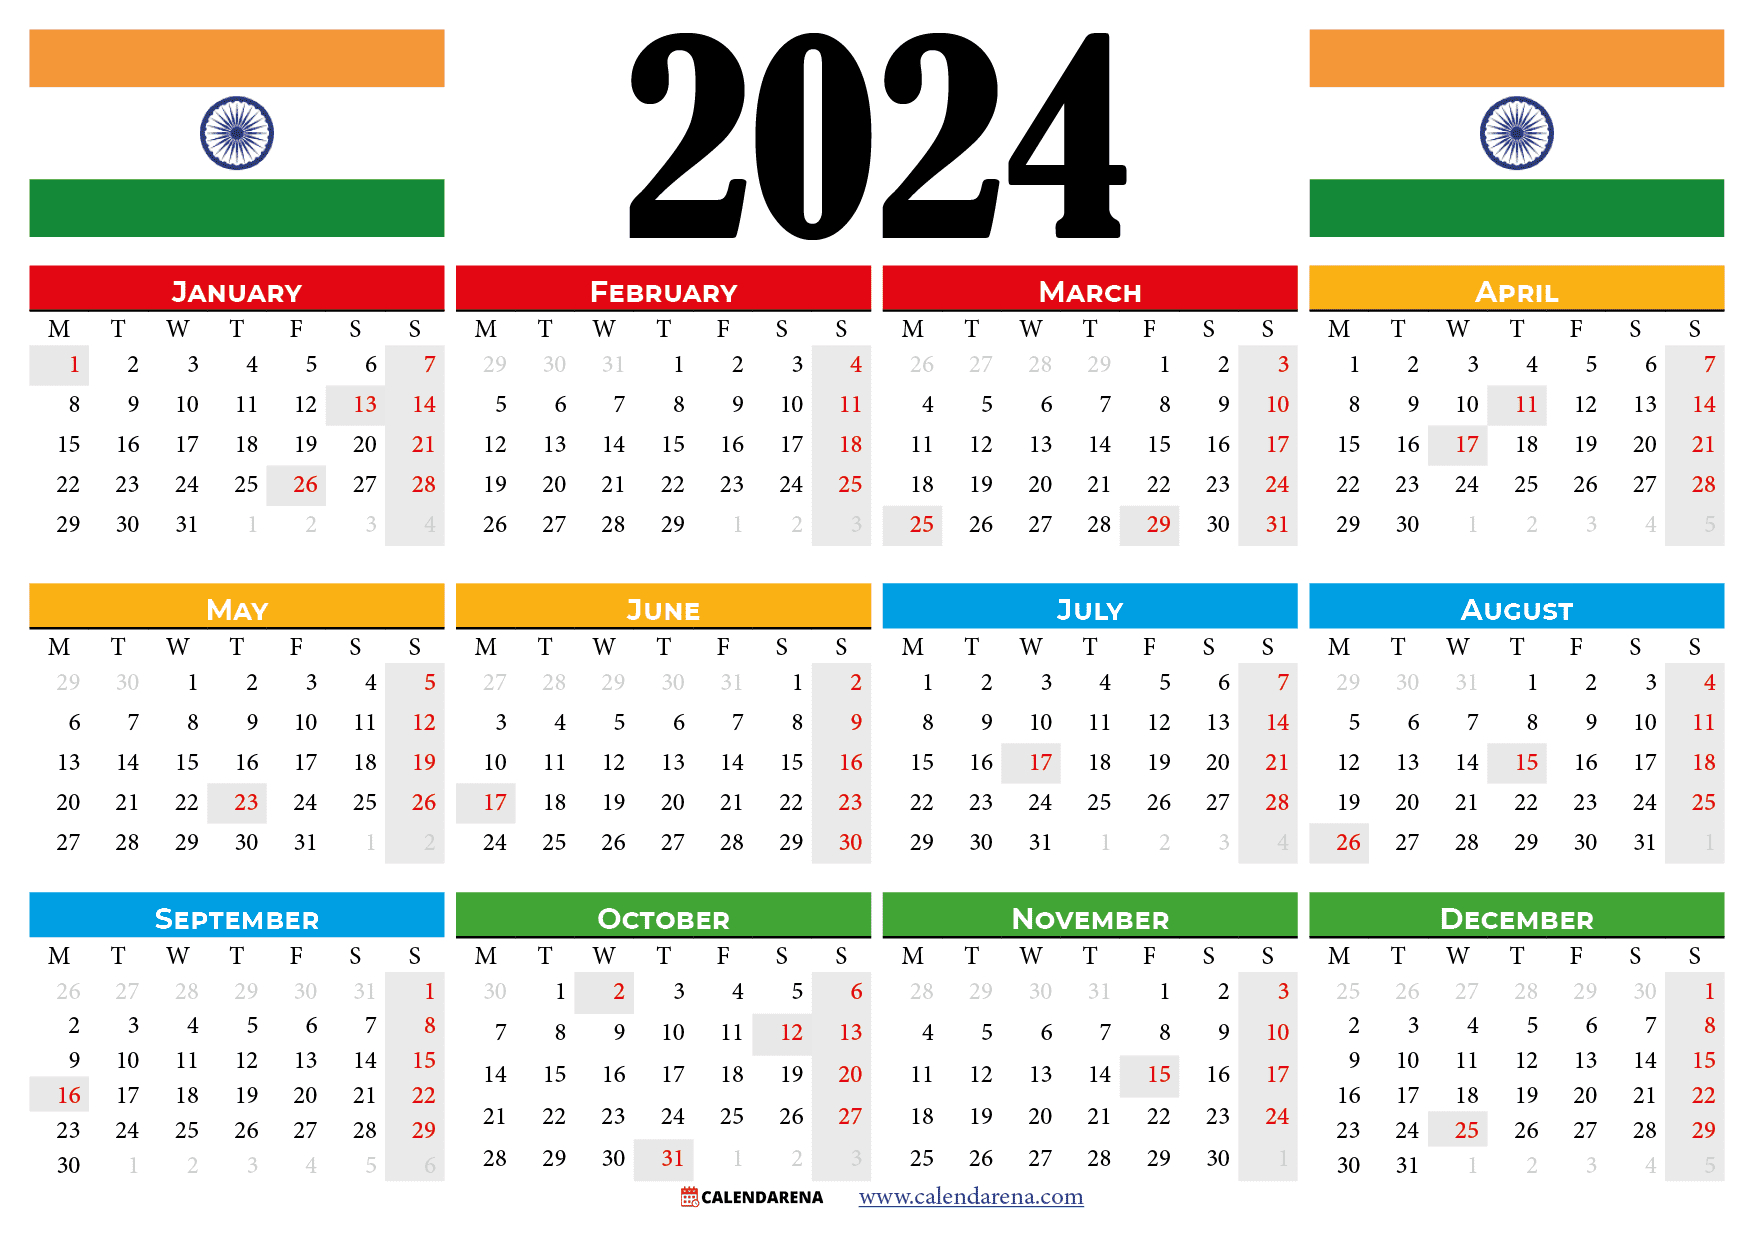 Calendar 2024 India With Holidays And Festivals | Printable Calendar 2024 With Holidays India